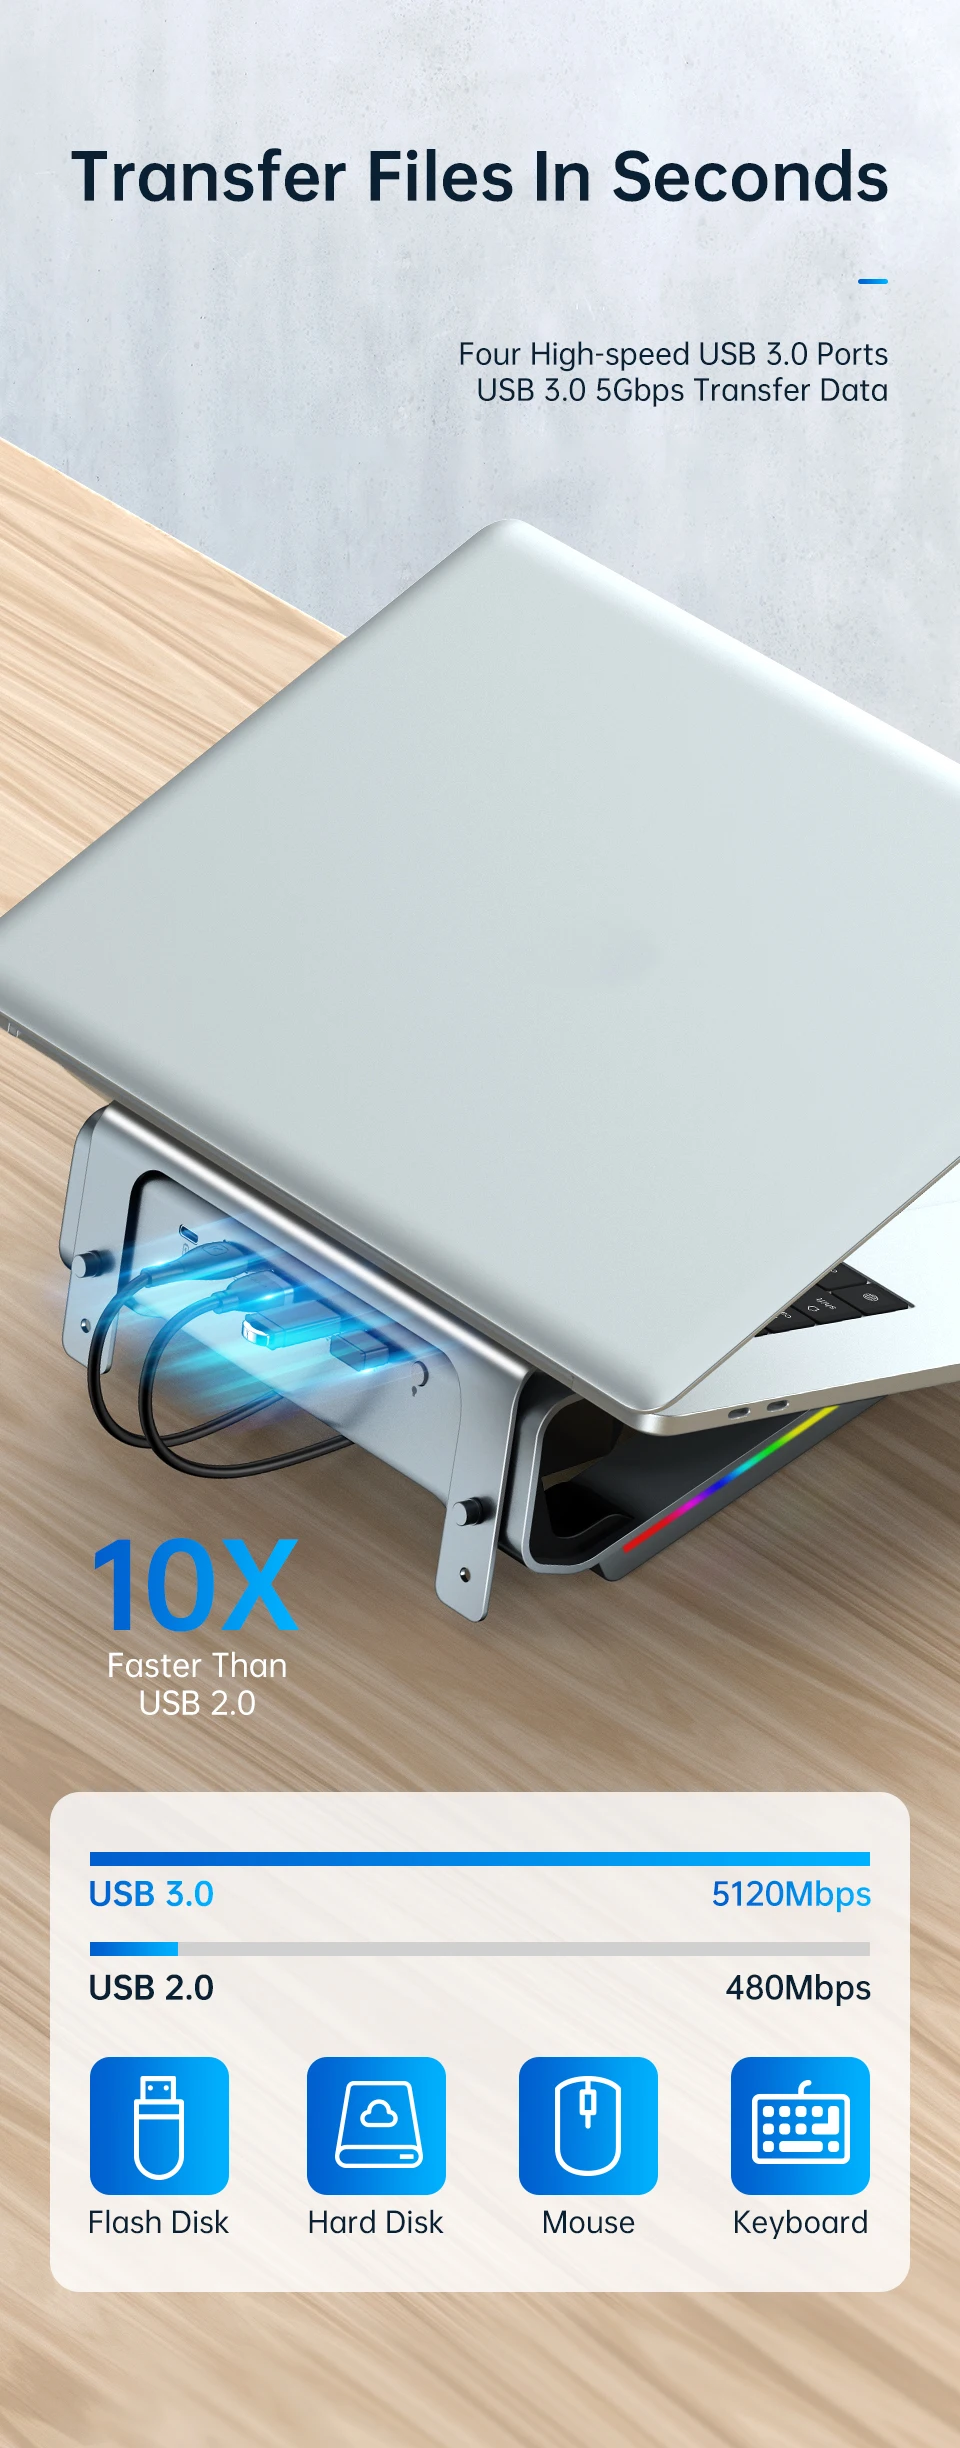 KUULAA Laptop Hub Stand Aluminum Alloy 4 Usb 3.0 Ports Pd 100W Fast Charging Hub Laptop Stand With 10 Modes Of RGB Lights